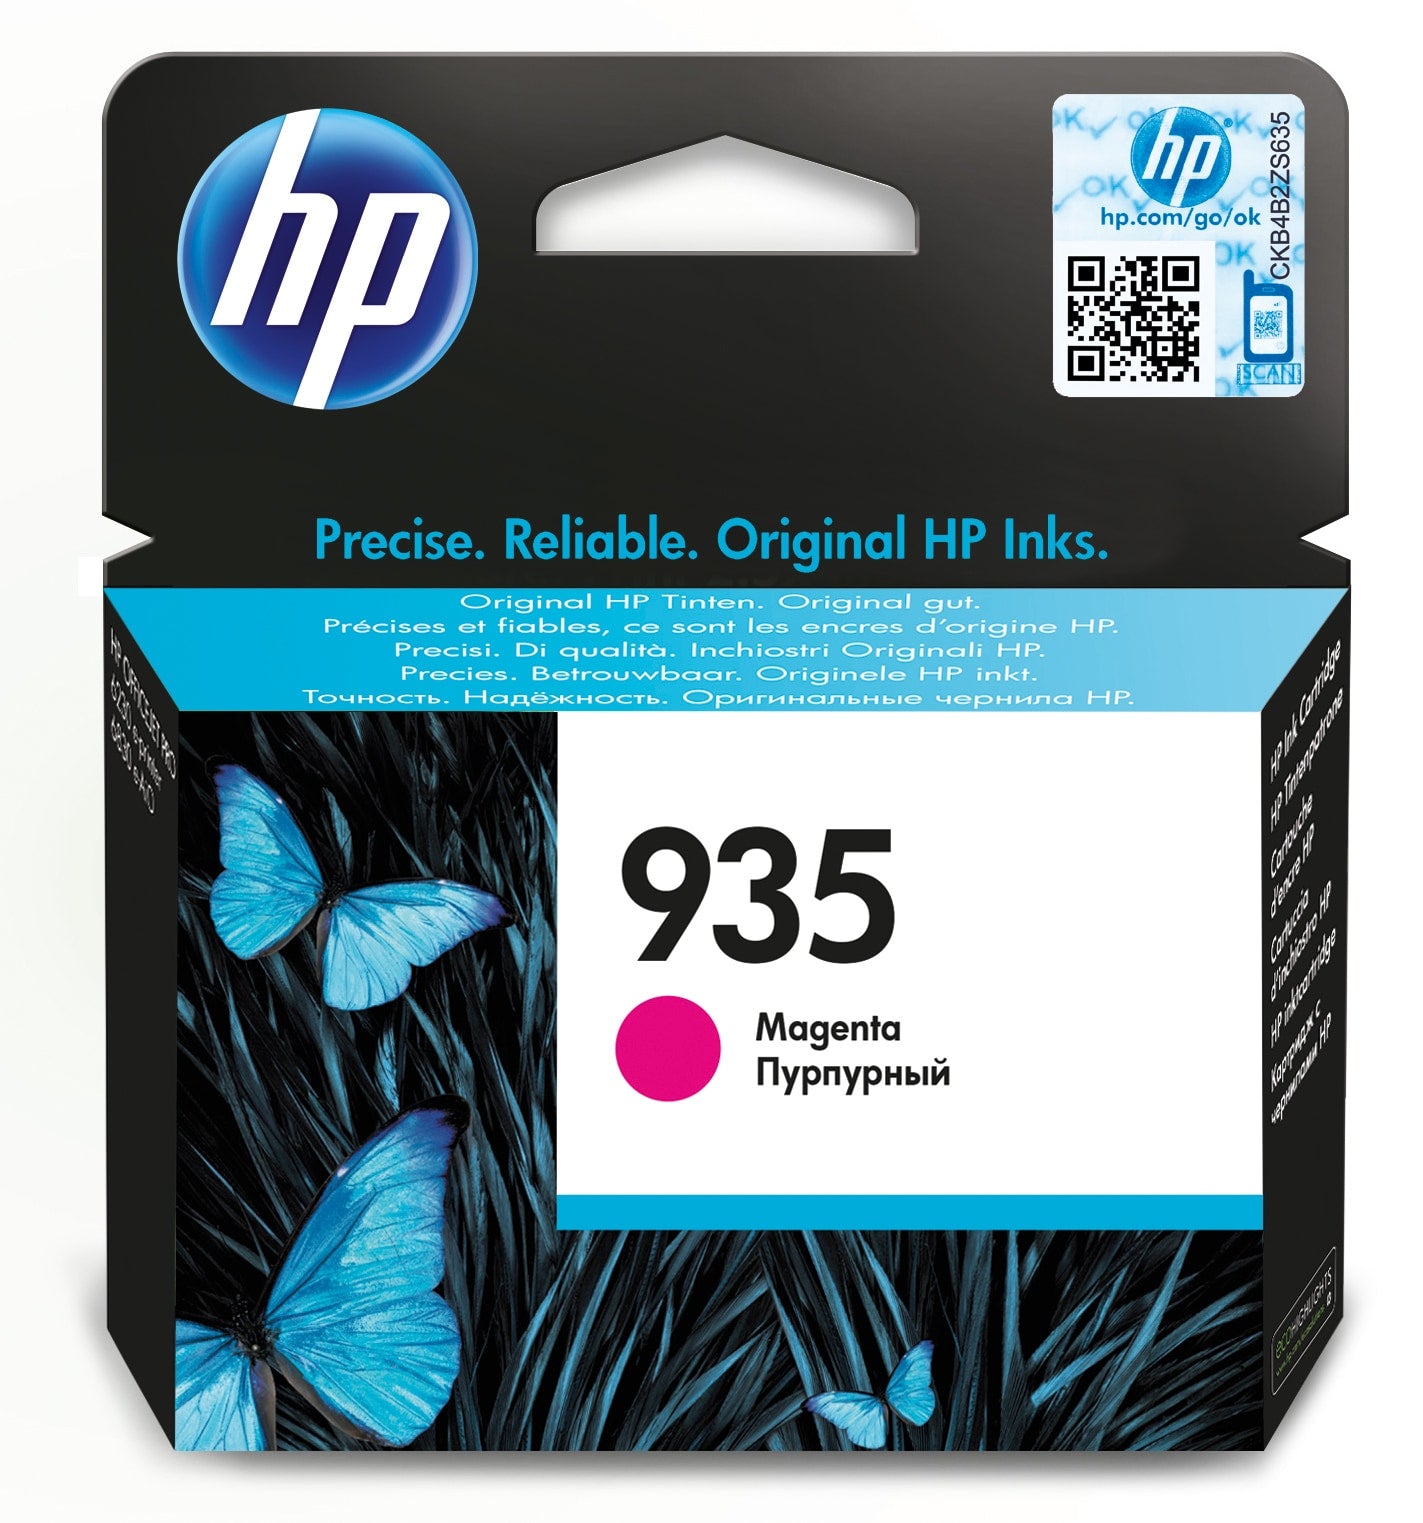 HP C2P21AE/935 Ink cartridge magenta, 400 pages ISO/IEC 24711 4.5ml for HP OfficeJet Pro 6230